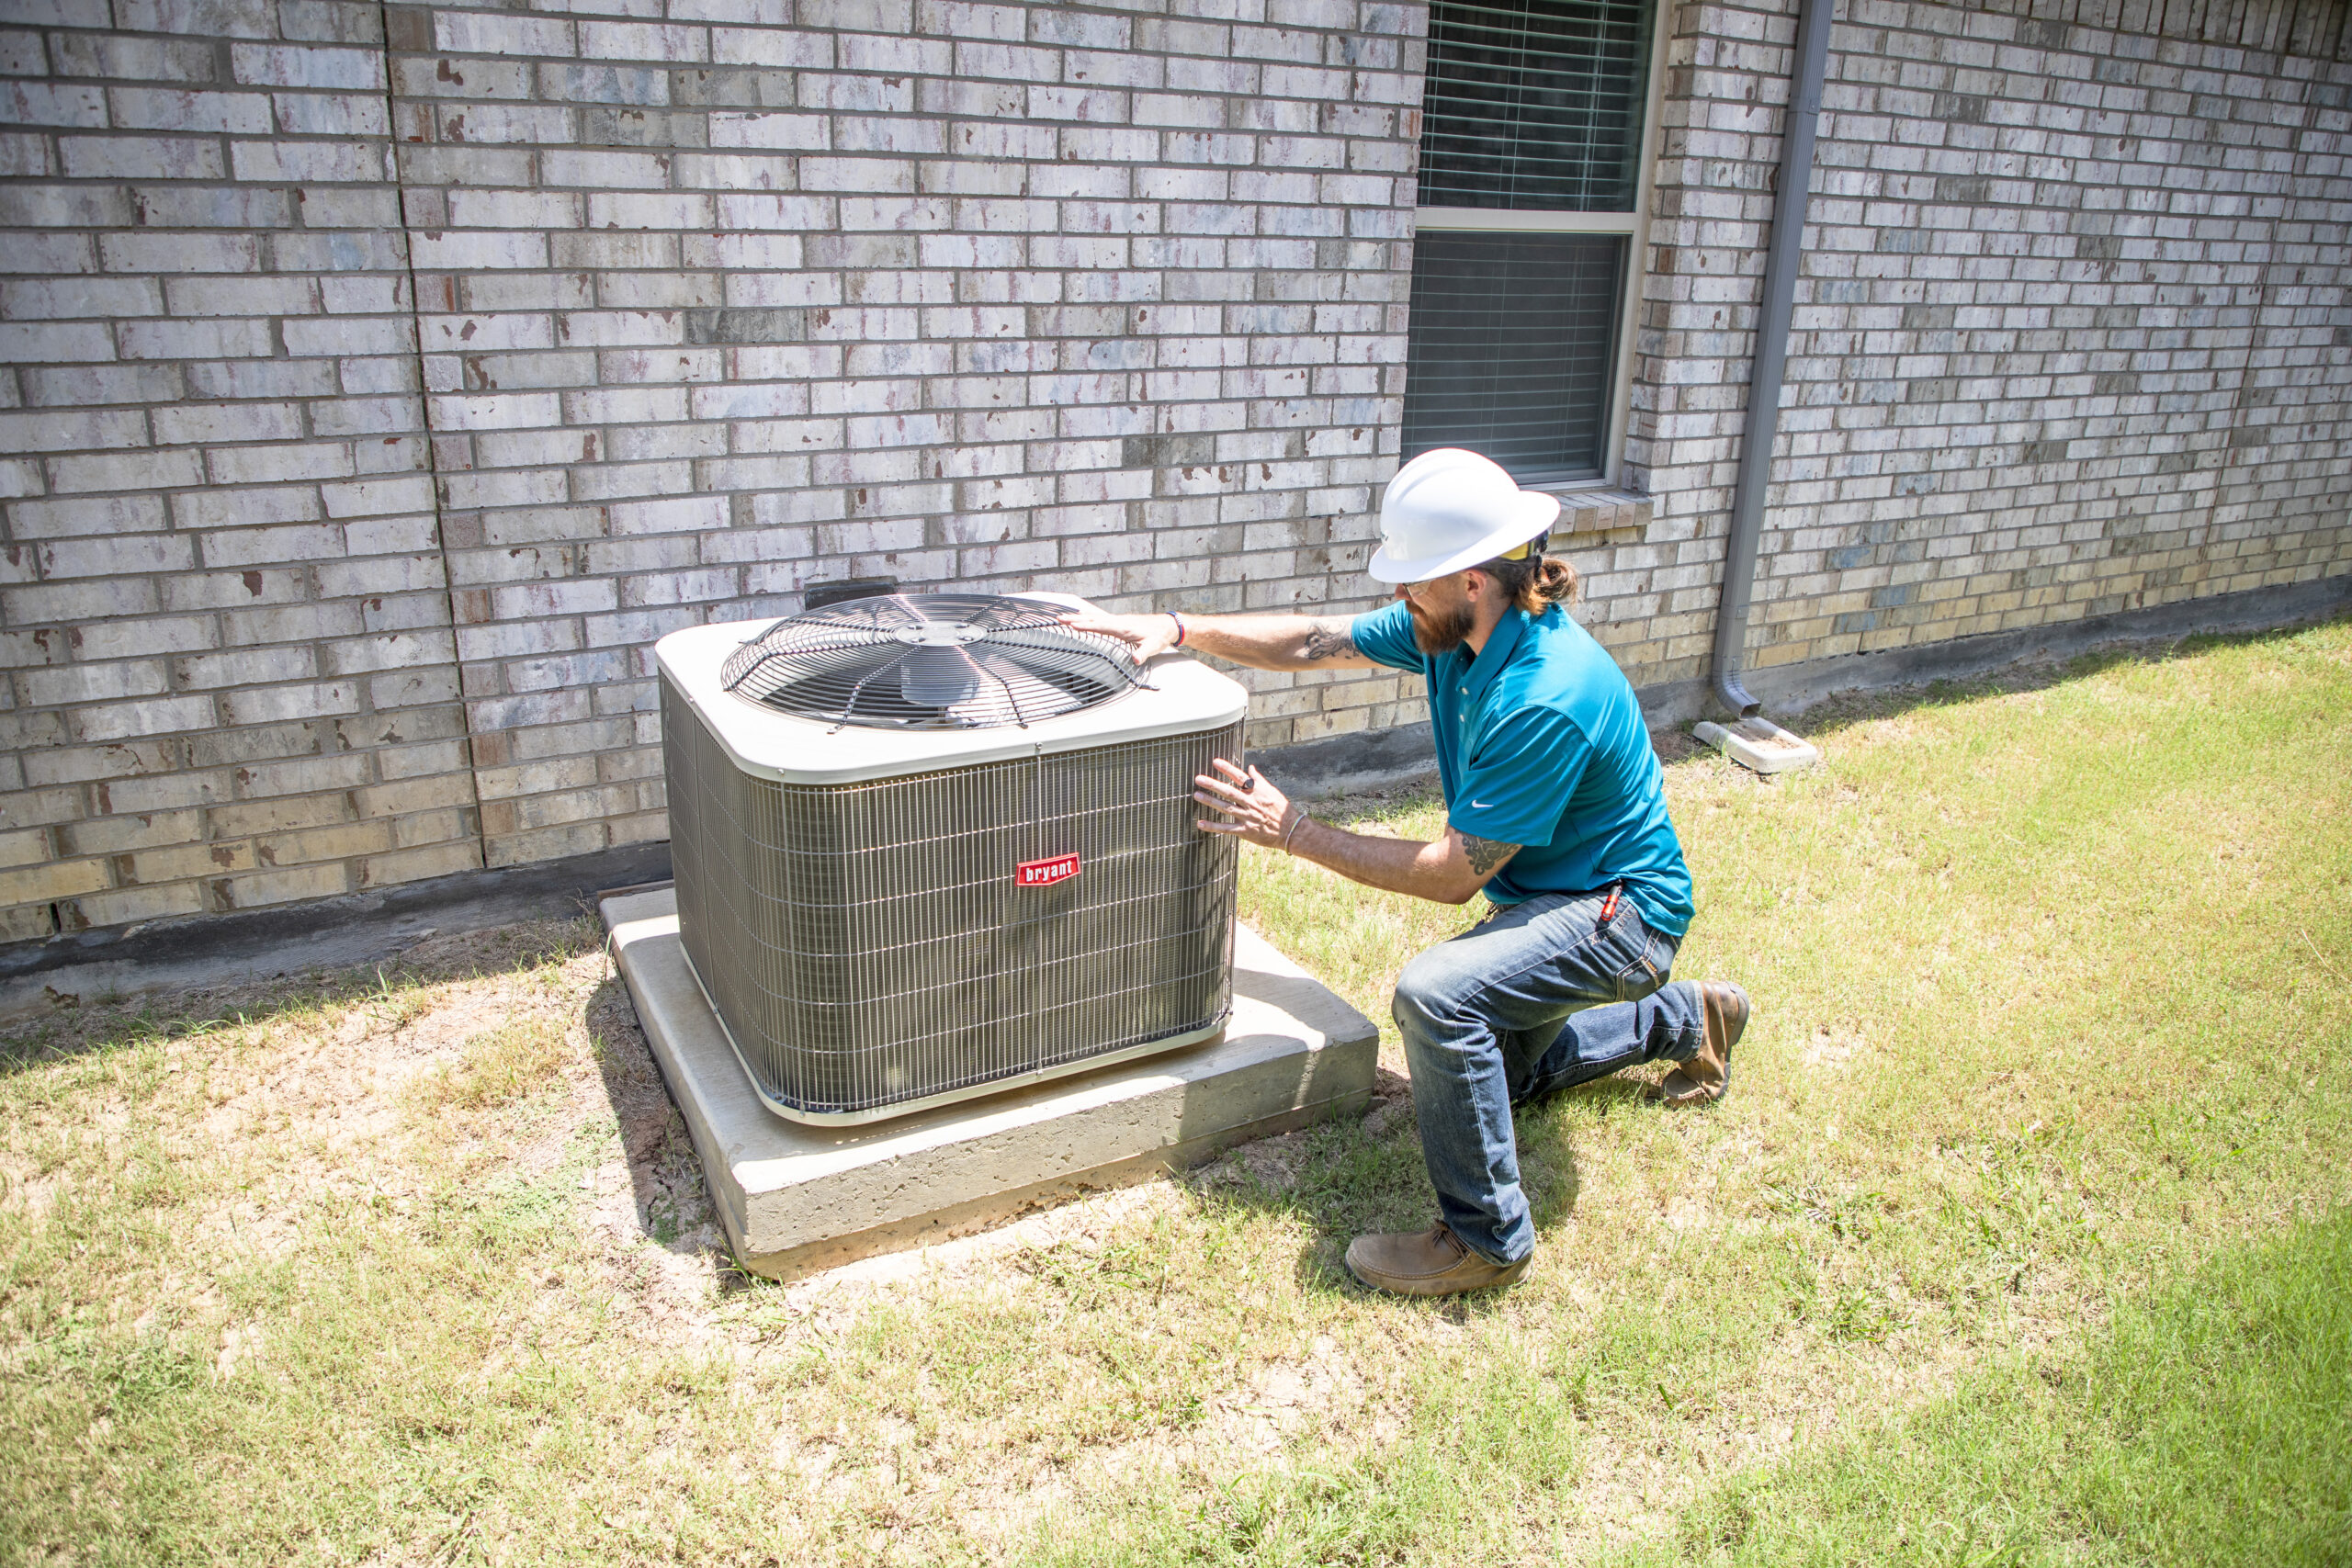 CoServ's Energy Resources team will check your HVAC system as part of the free Energy Assessment.  